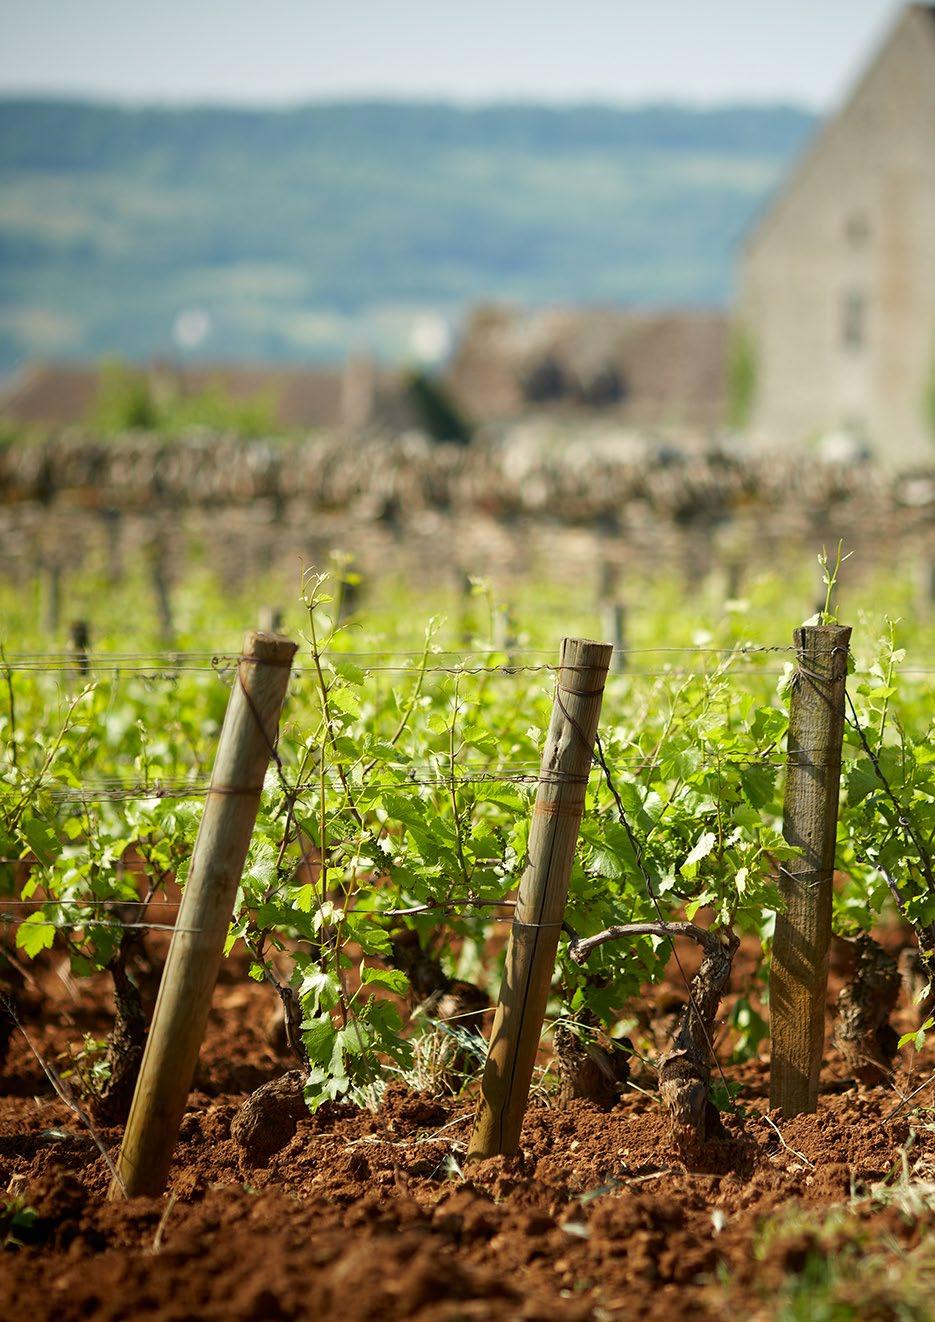 VINTAGE INSIGHTS: BURGUNDY 2017 - VIN DE PAILLE The physiological foundations of every new vintage lie in the one preceding.